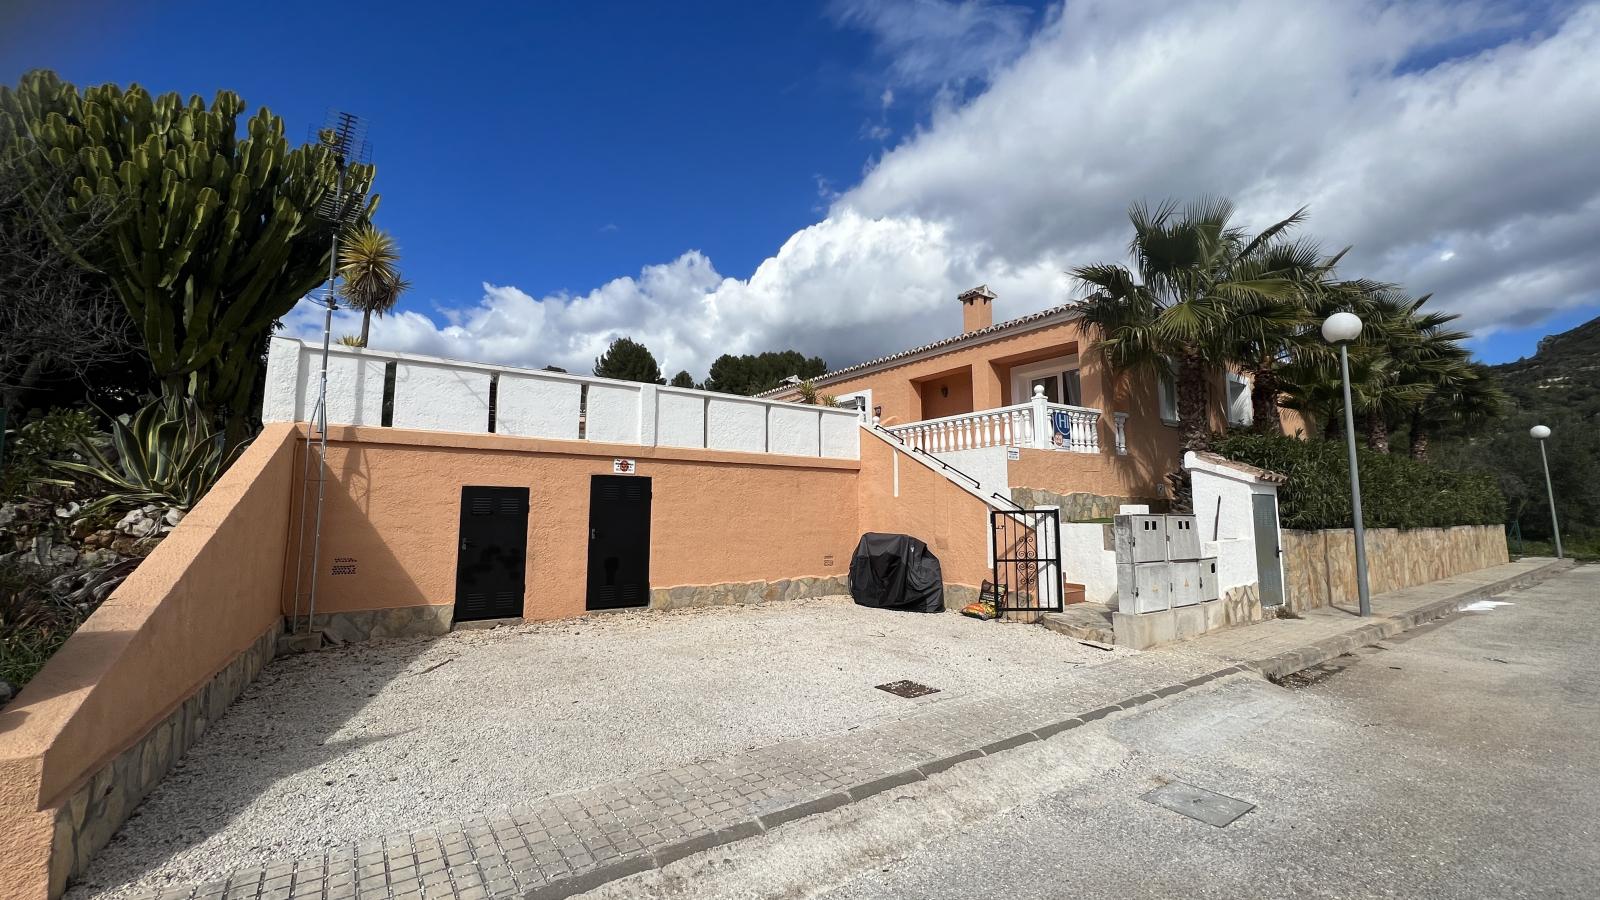 2 bedroom semi-detached house with communal pool in Alcalali.